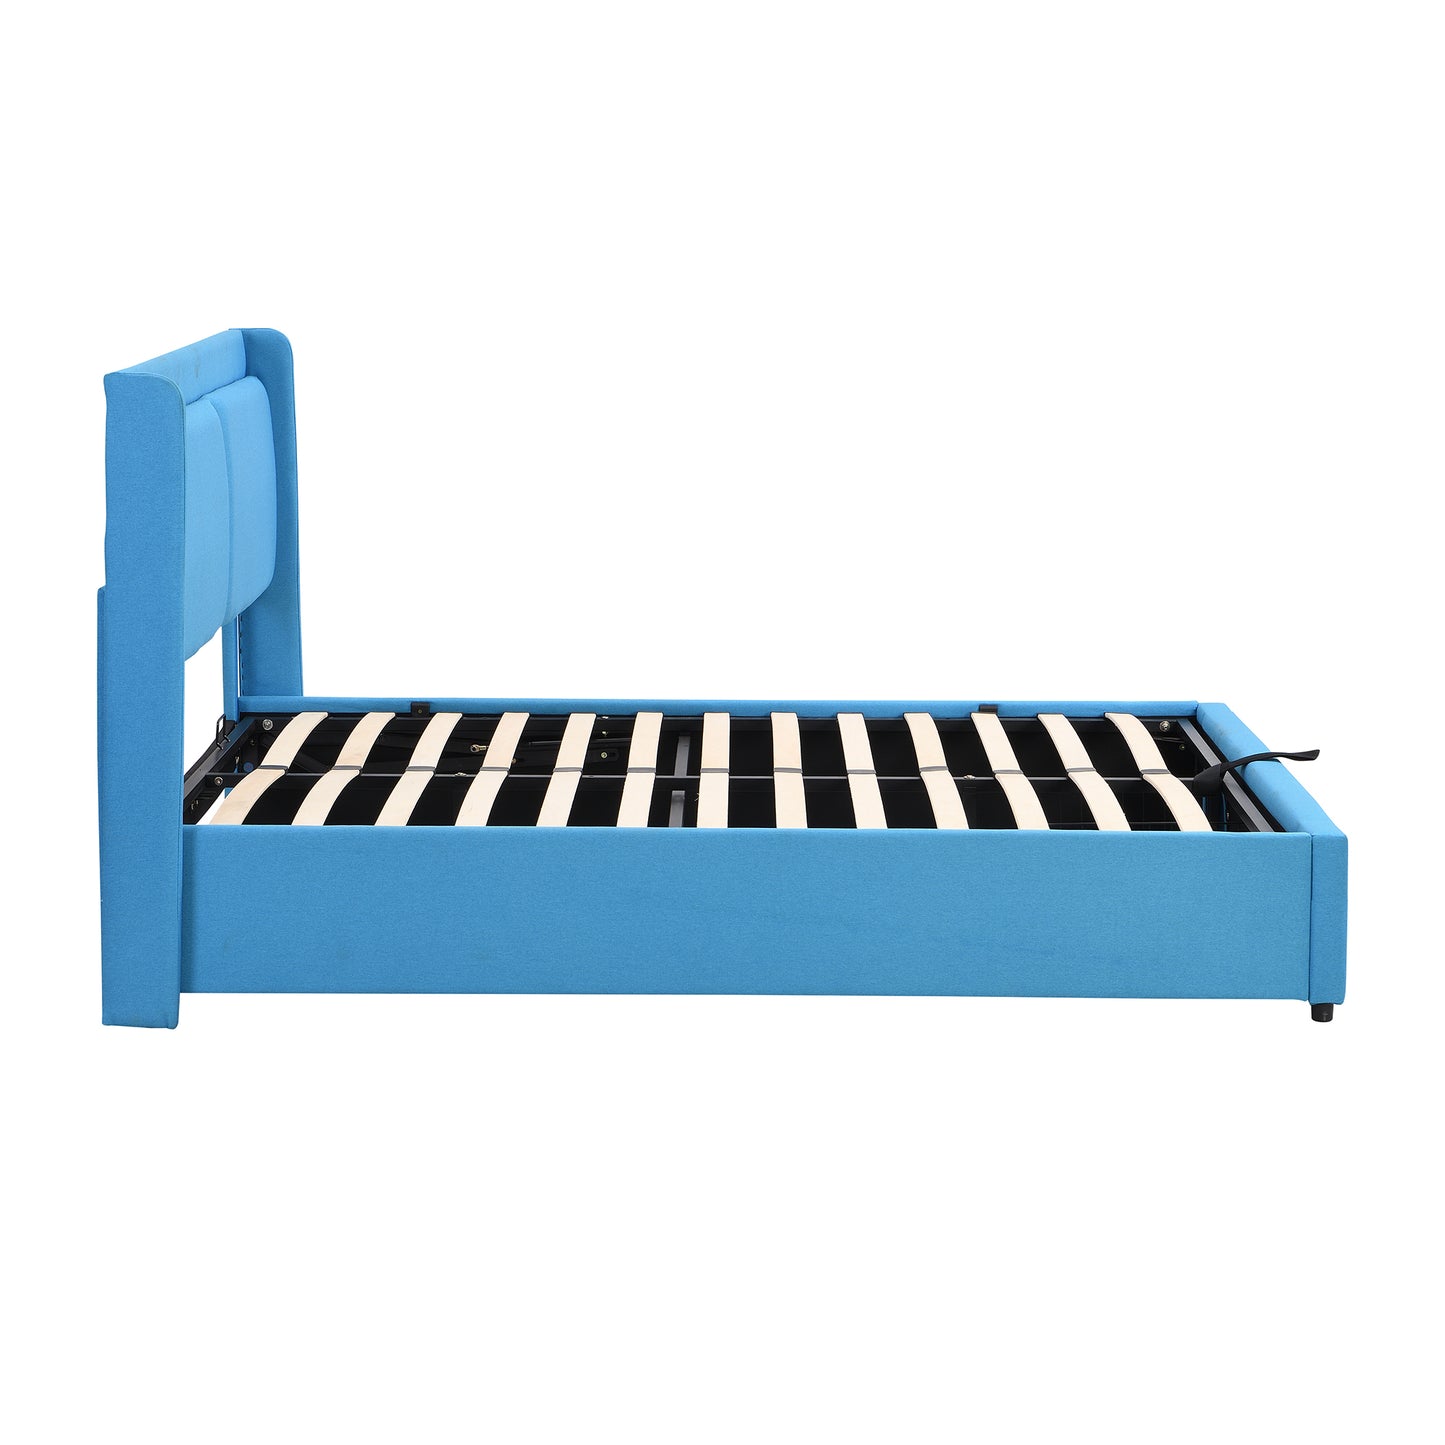 Queen Size Storage Upholstered Hydraulic Platform Bed with 2 Drawers, Blue